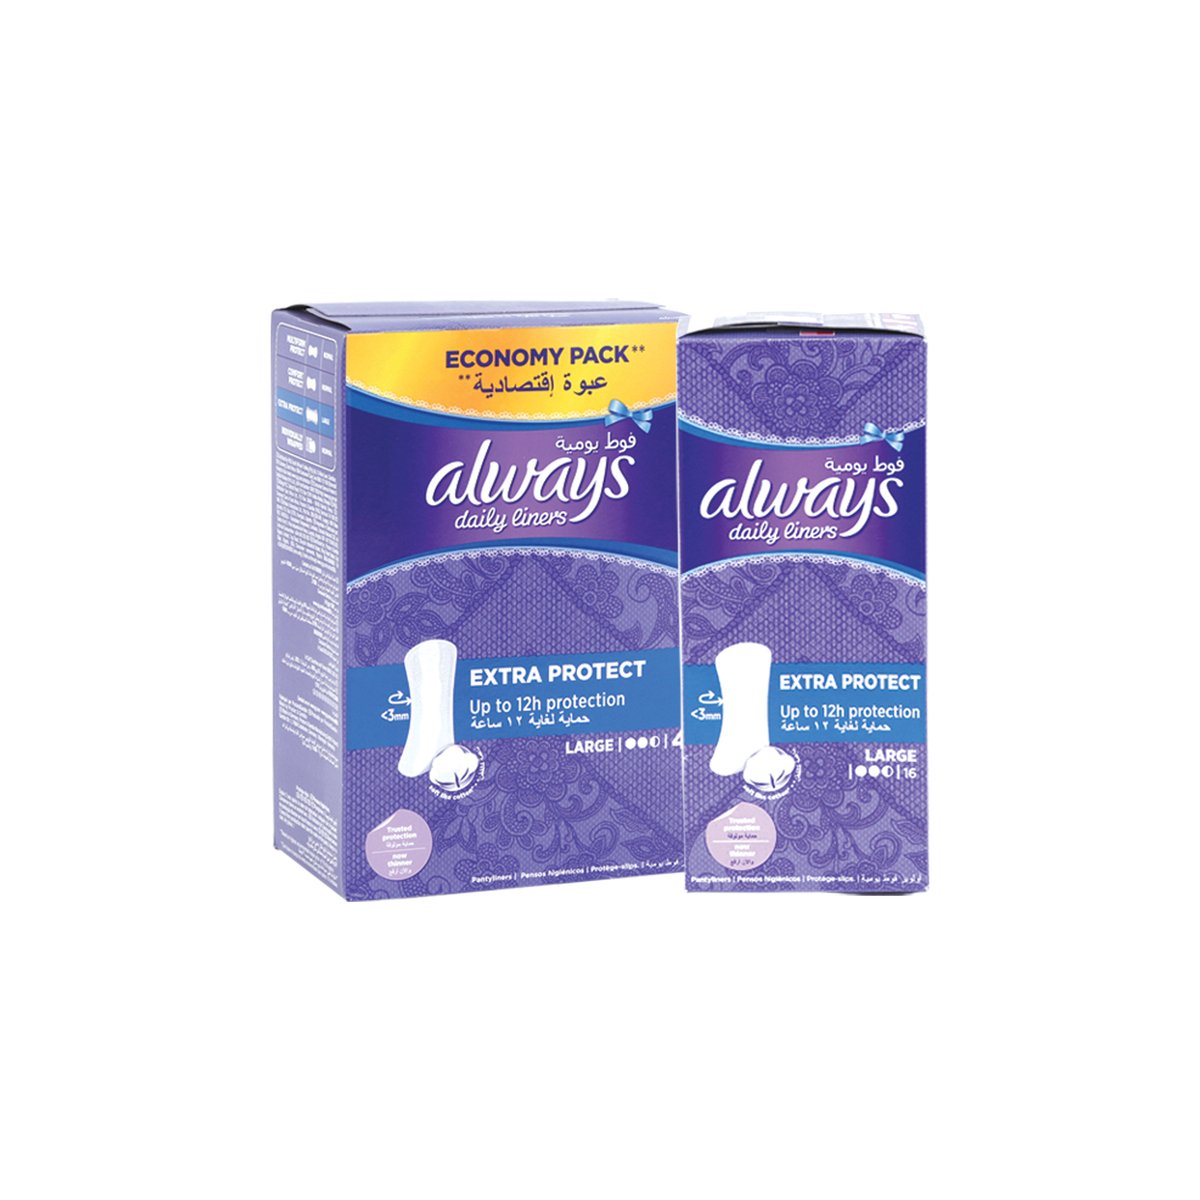 Always Daily Liners Extra Protect Large 48pcs + 16pcs Online at Best Price, Sanpro Panty Liners